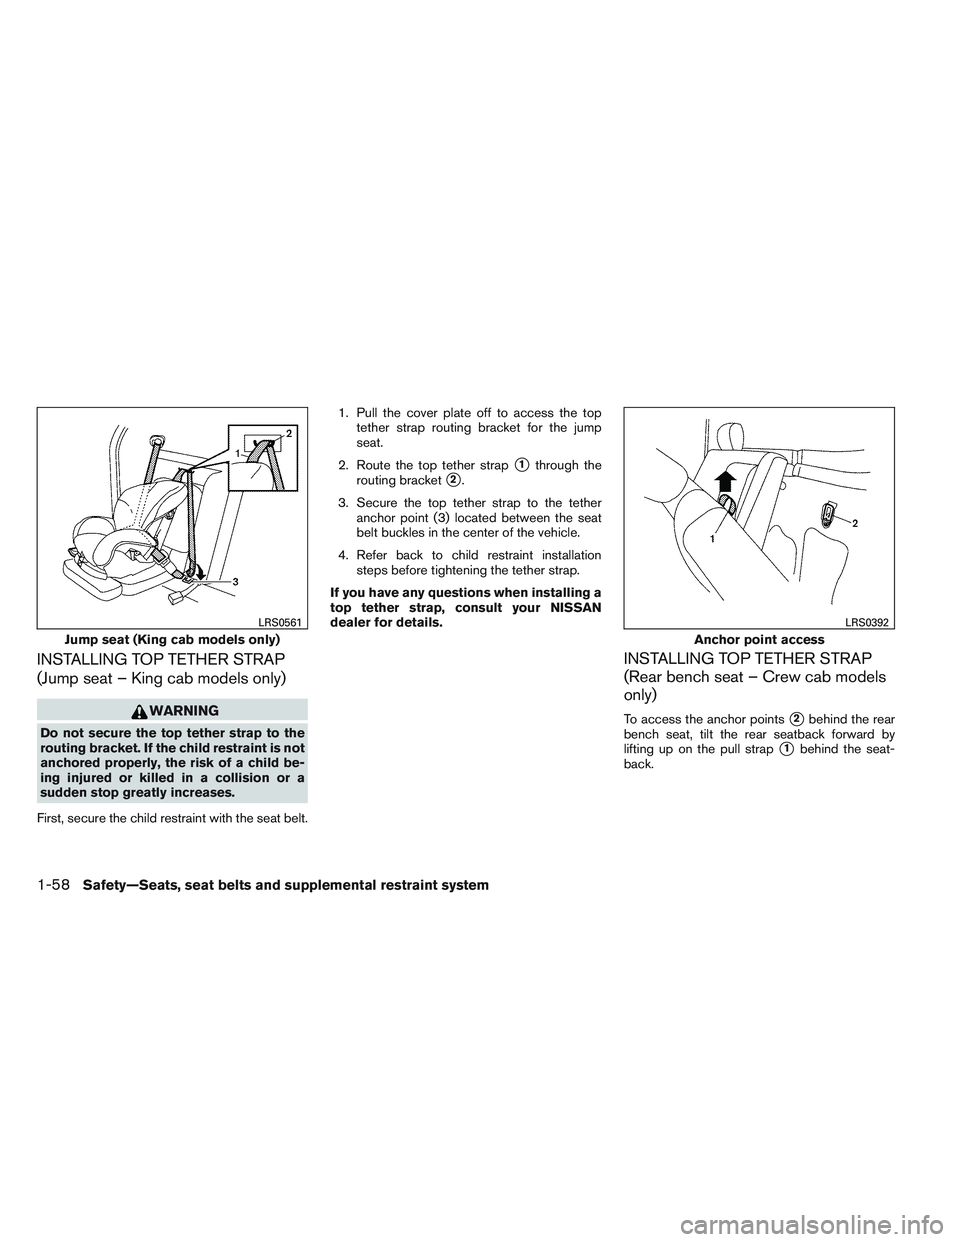 NISSAN FRONTIER 2012  Owner´s Manual INSTALLING TOP TETHER STRAP
(Jump seat – King cab models only)
WARNING
Do not secure the top tether strap to the
routing bracket. If the child restraint is not
anchored properly, the risk of a child